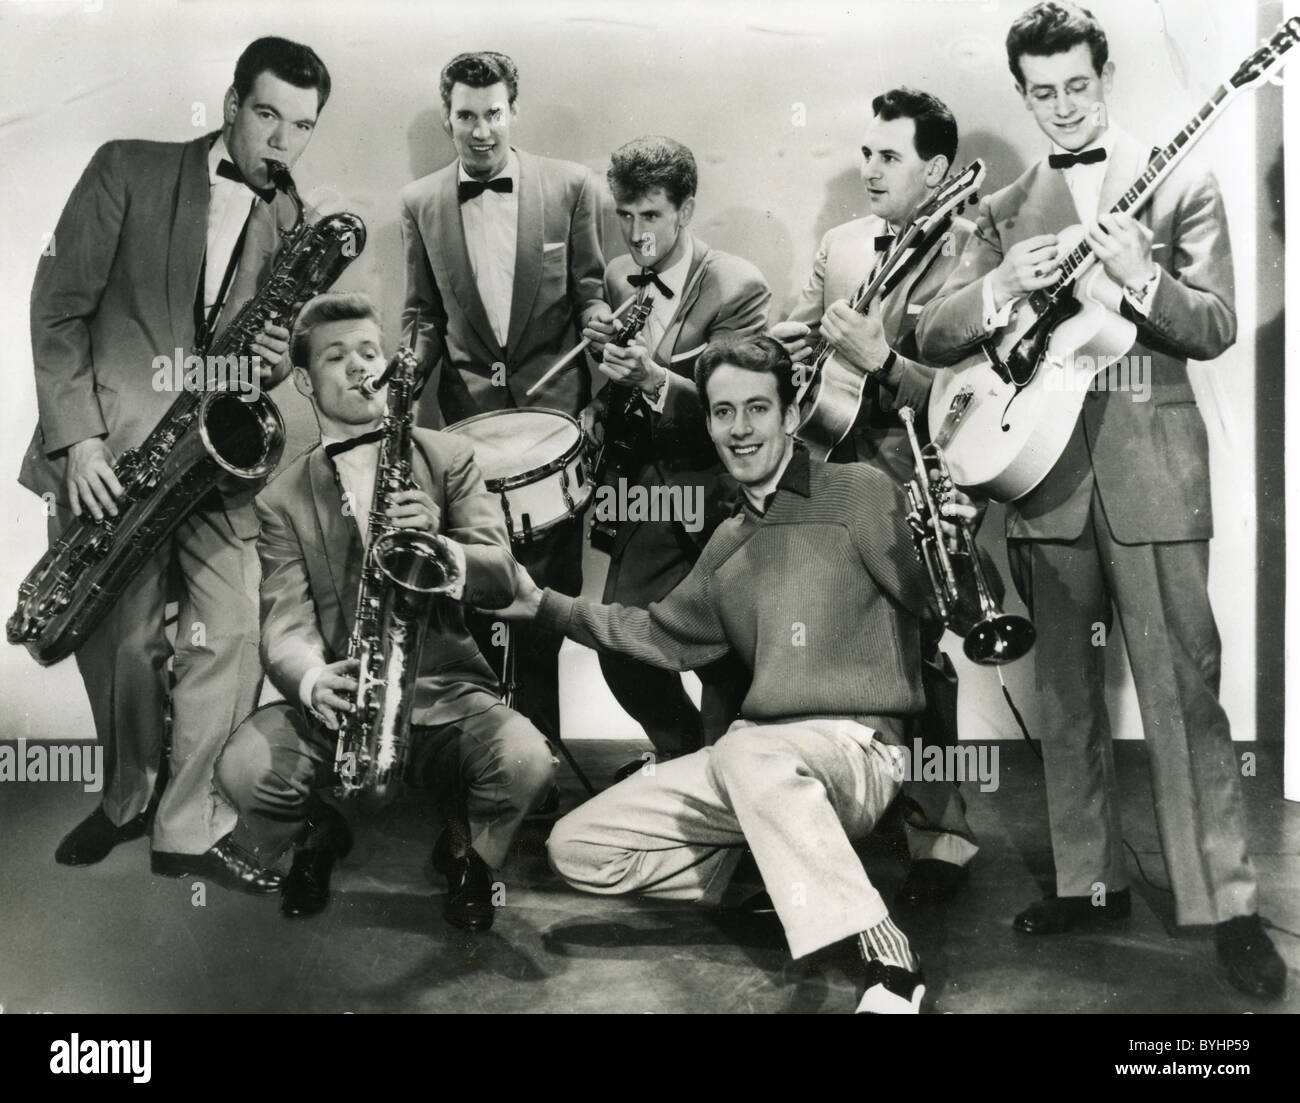 JOHN BARRY SEVEN  Film score composer John Barry (white trousers) with his pop group about 1958 Stock Photo